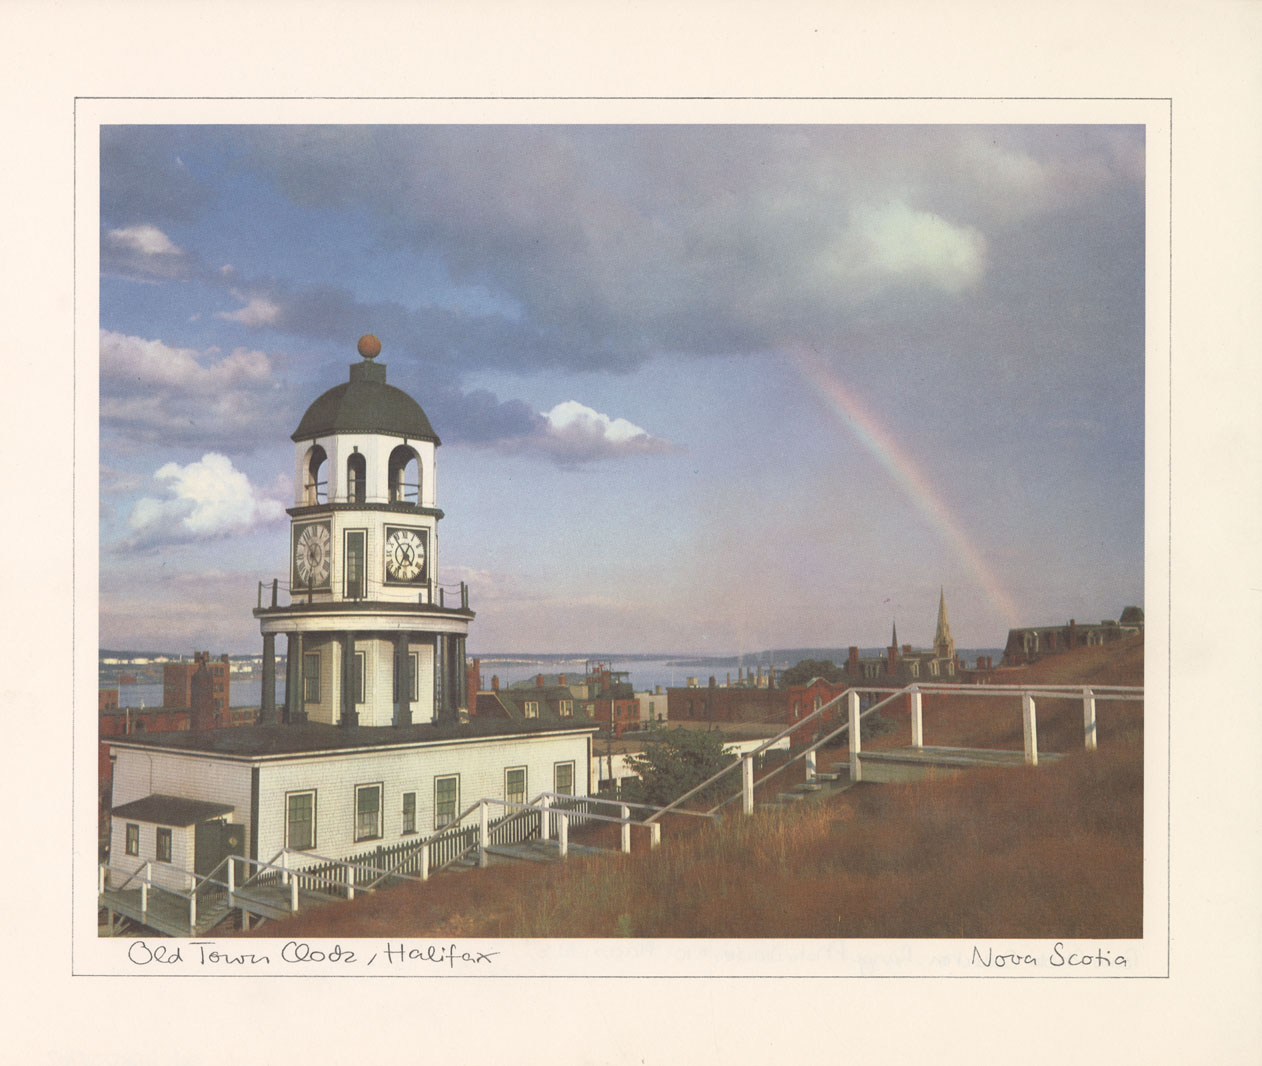 Book Jackets, Advertisements, and Art Reproductions: Atlantic Pavillion Photos of NS (from expo '67): Old Town Clock - Halifax